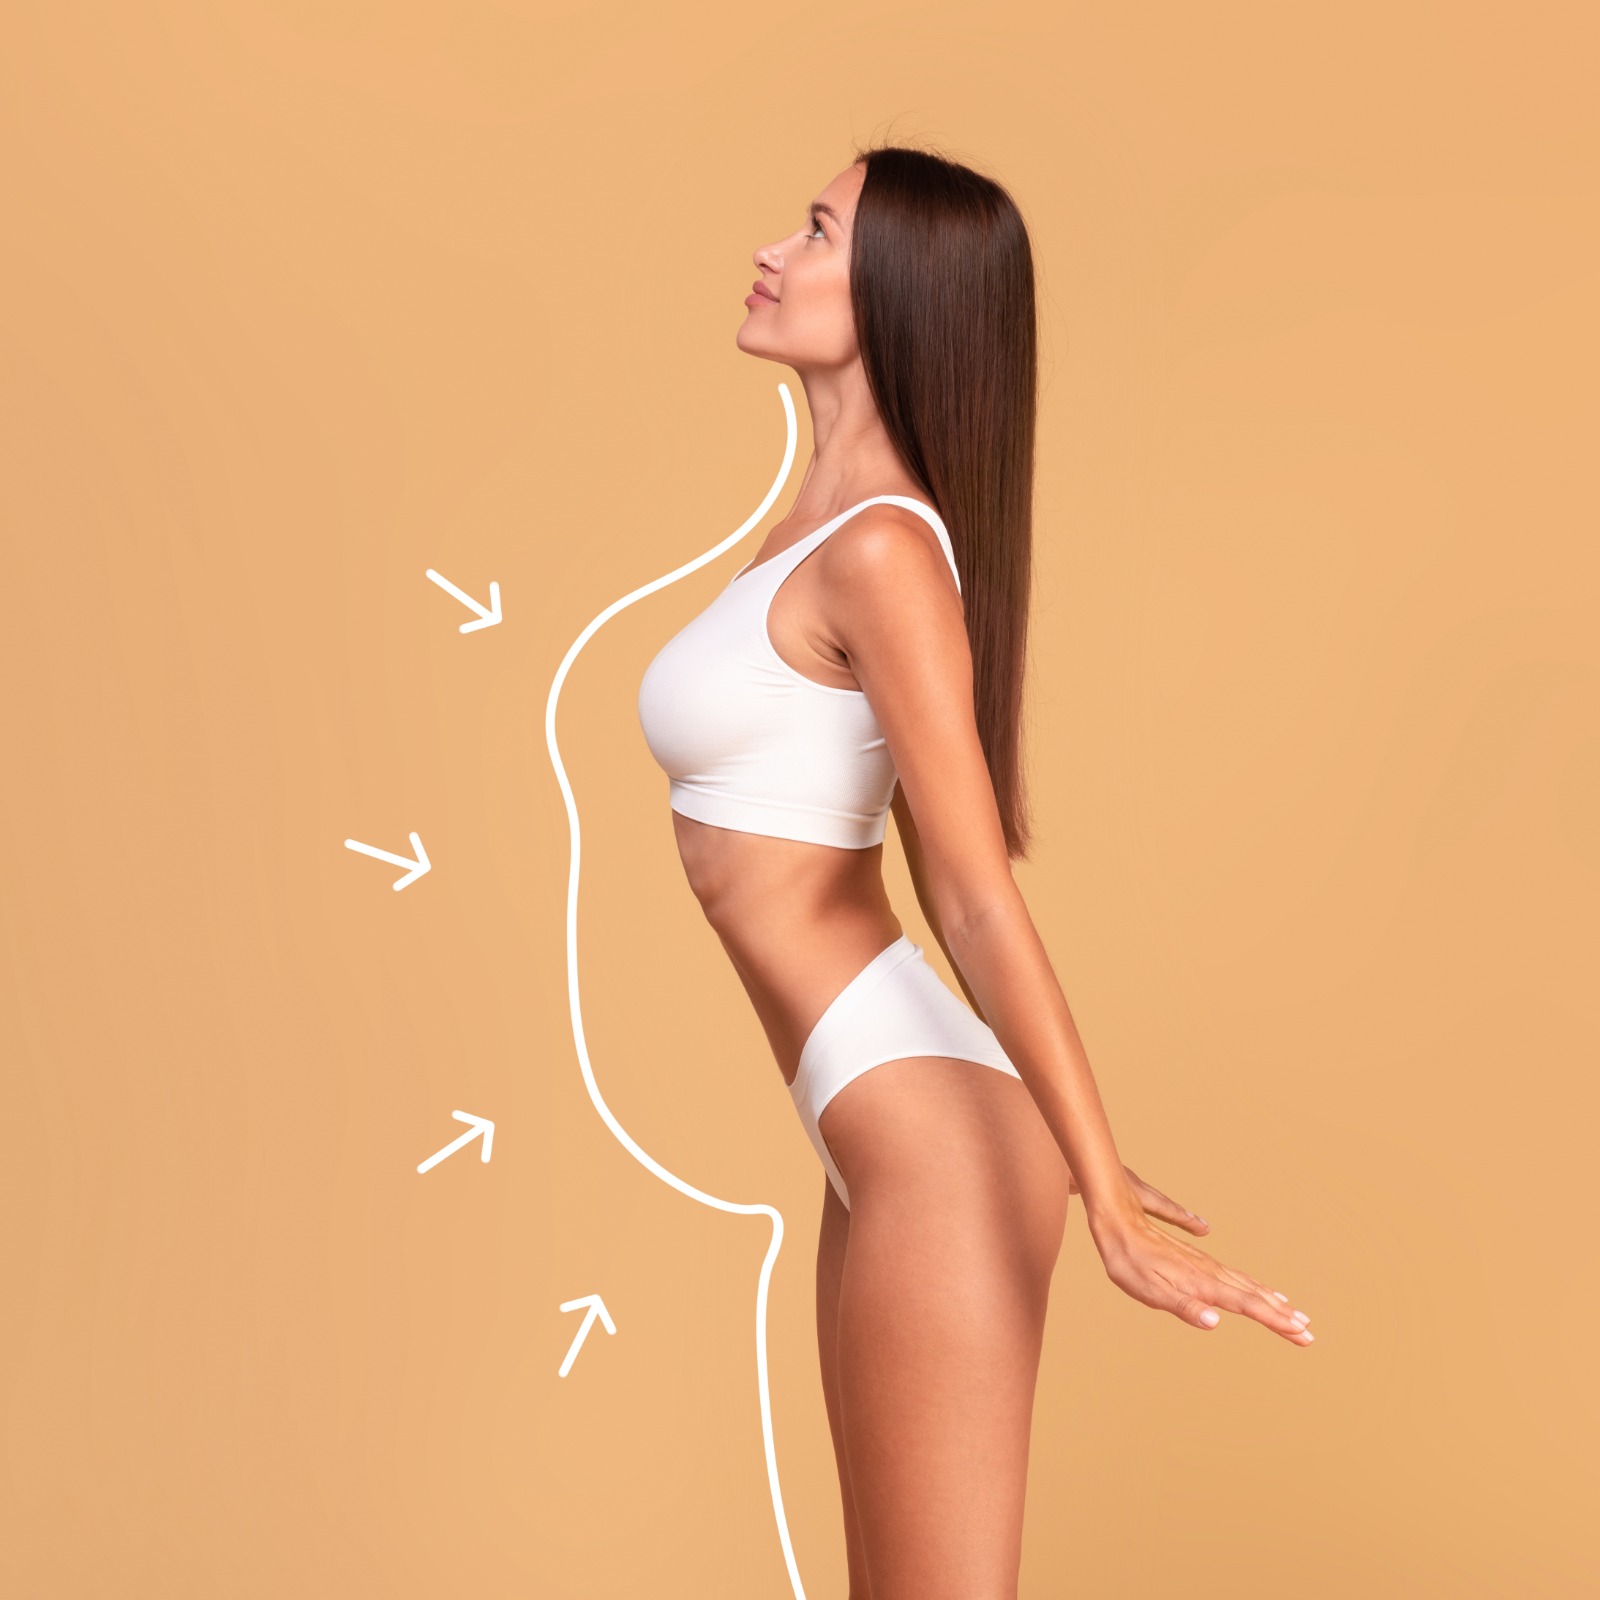 10 Most Popular Treatment Areas related to Liposuction